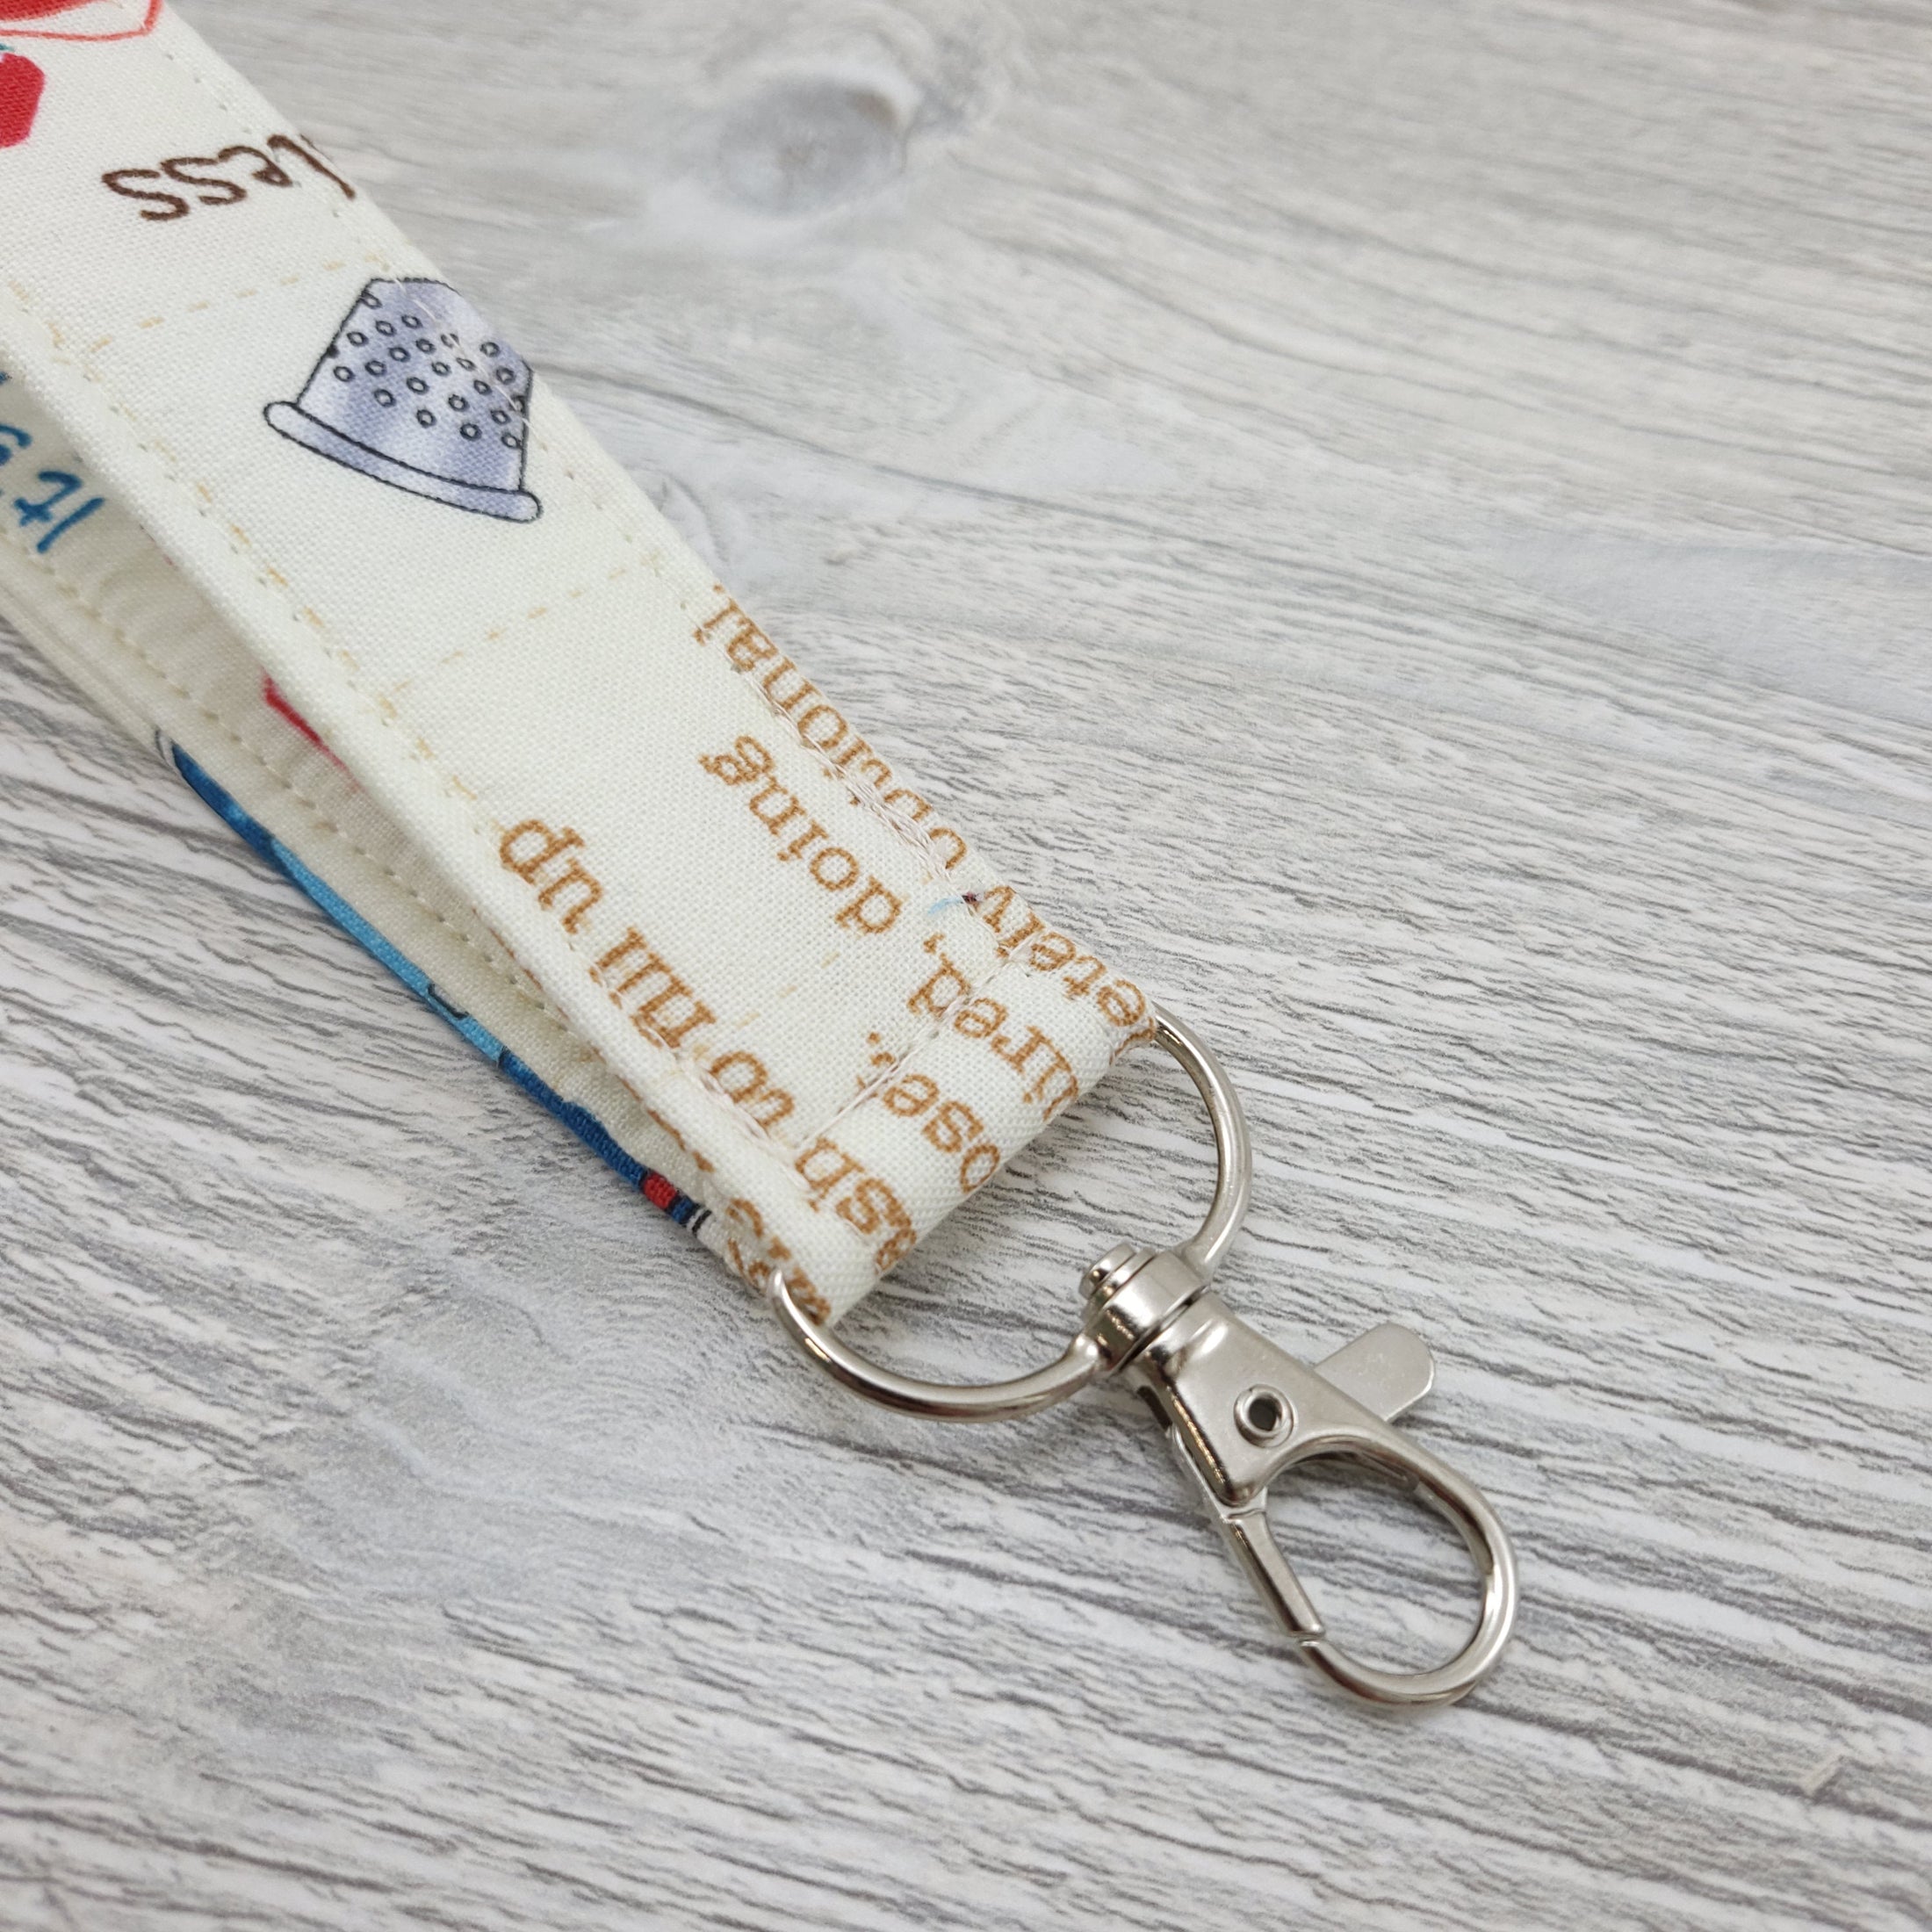 Quilter's Key Fob - 5.5" long and 1" wide-The Steady Hand